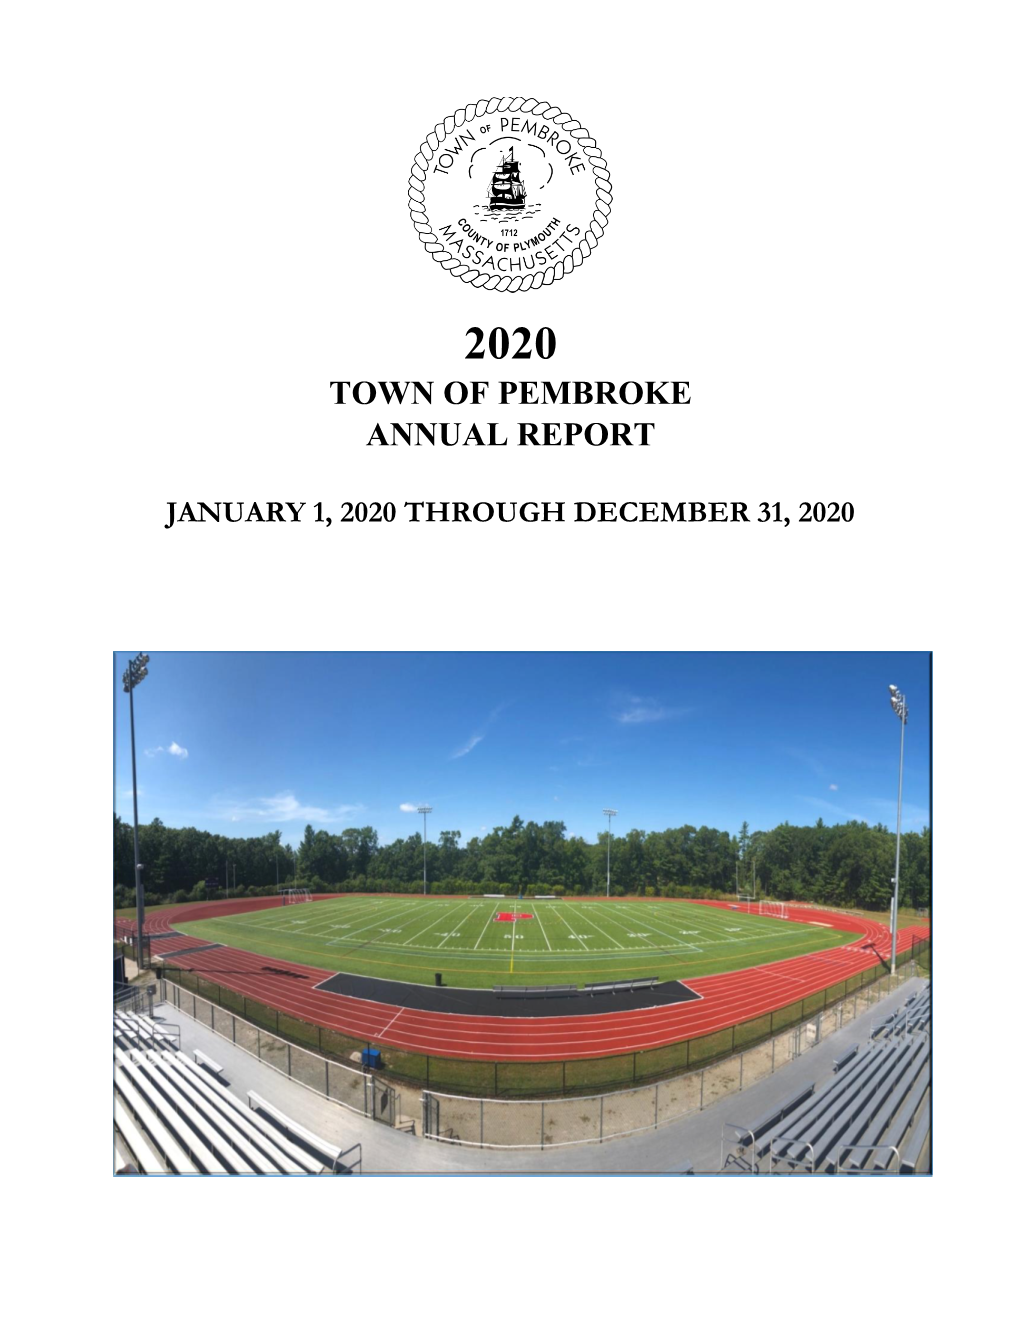 2020 Annual Town Report Pembroke Police Department